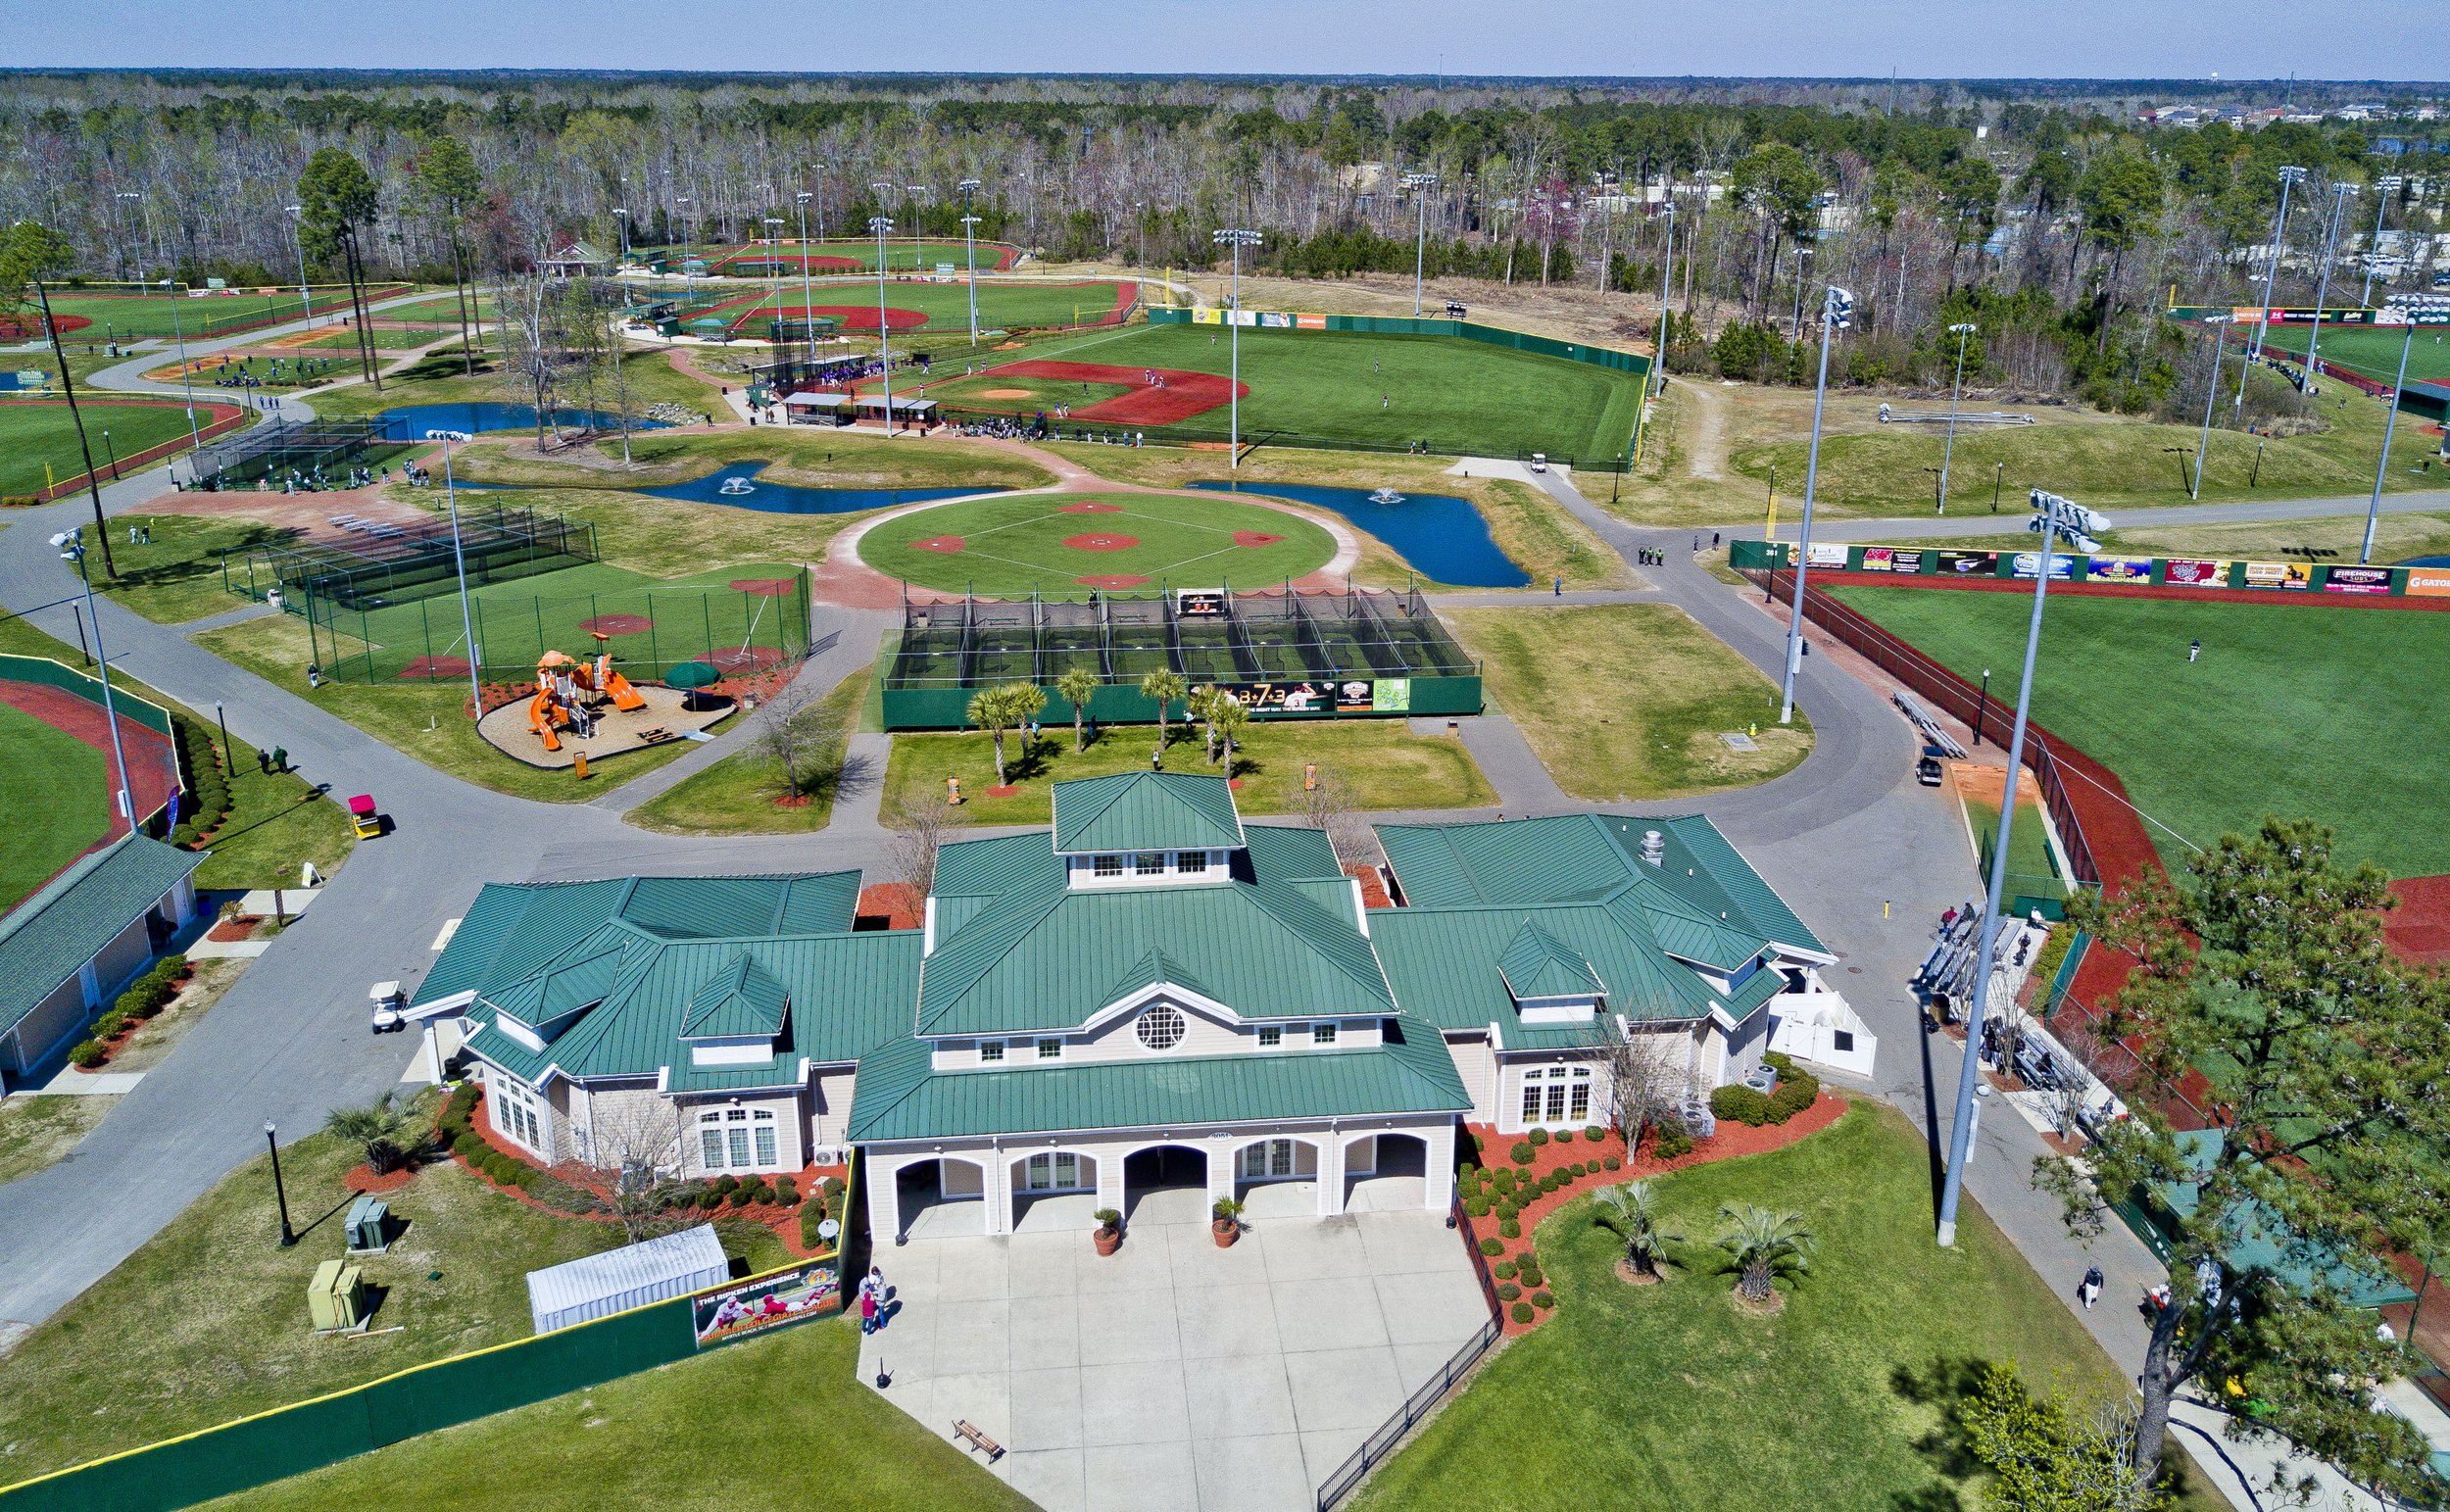 HiCast Sports Network Extends Viewership for The Ripken Experience™ Myrtle Beach, One of the Hottest Sports Tourism Destinations in the U.S